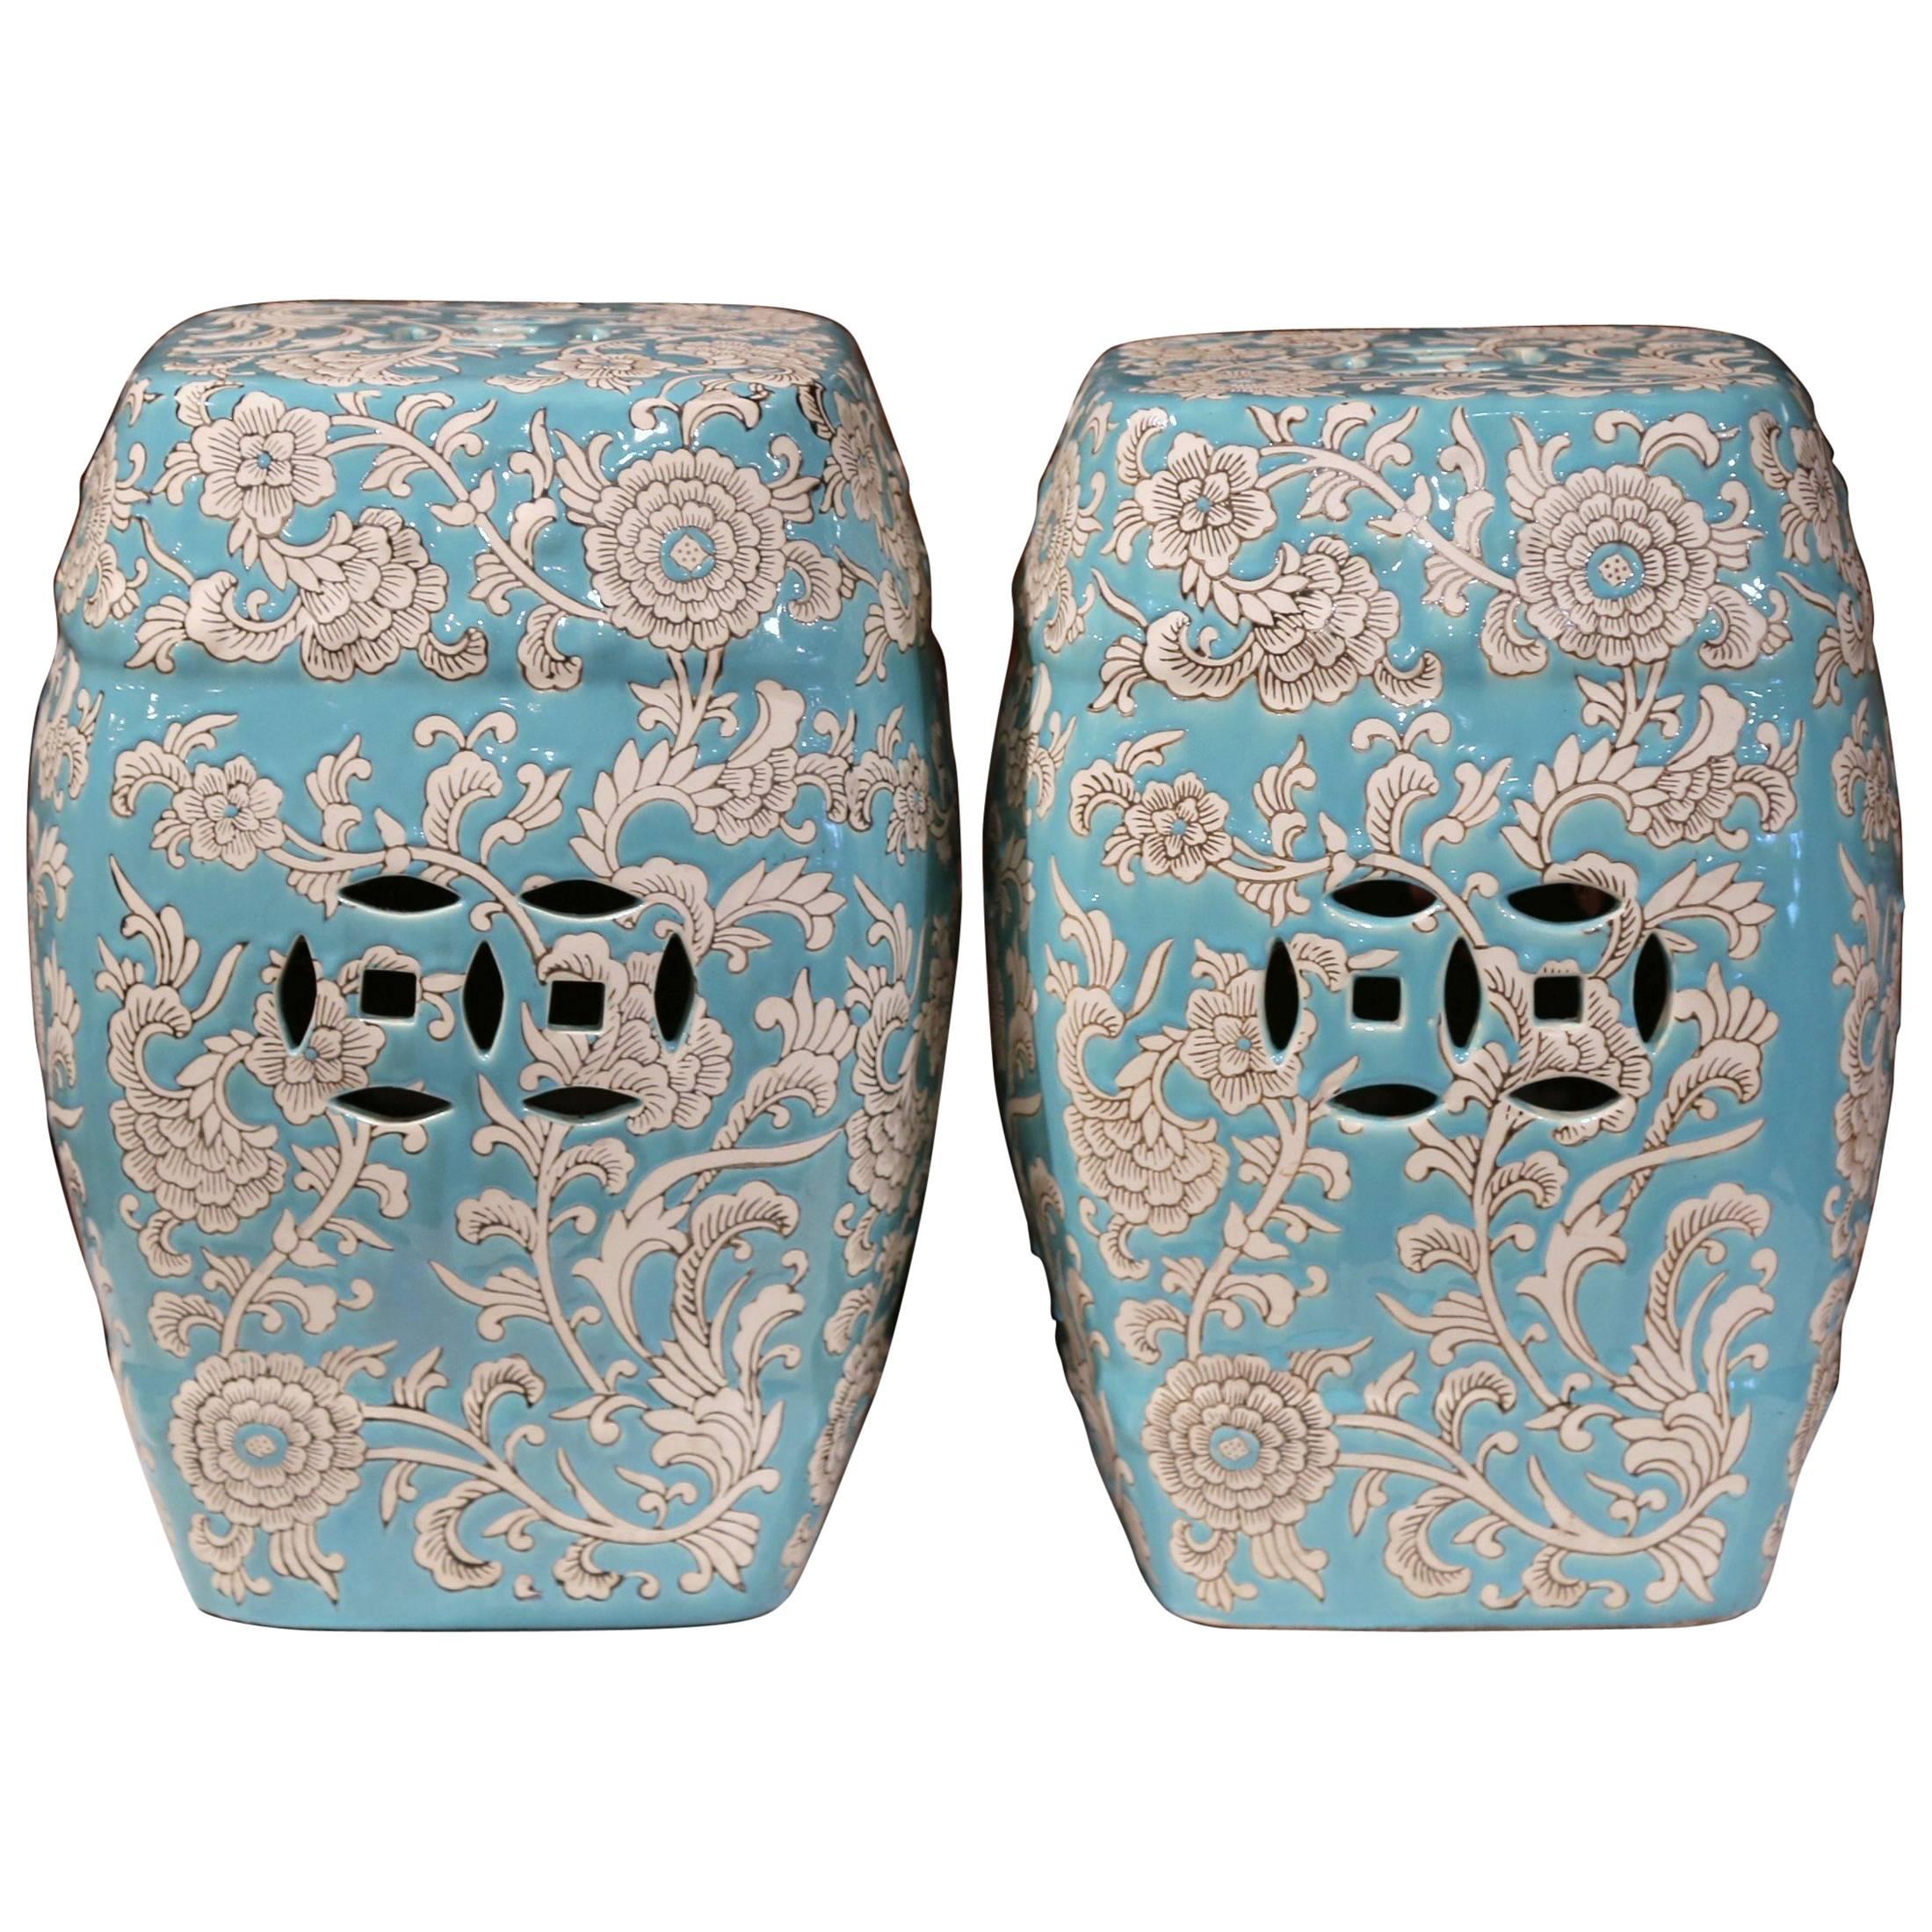 Mid-20th Century Pair of Asian Turquoise and White Glazed Ceramic Garden Stools